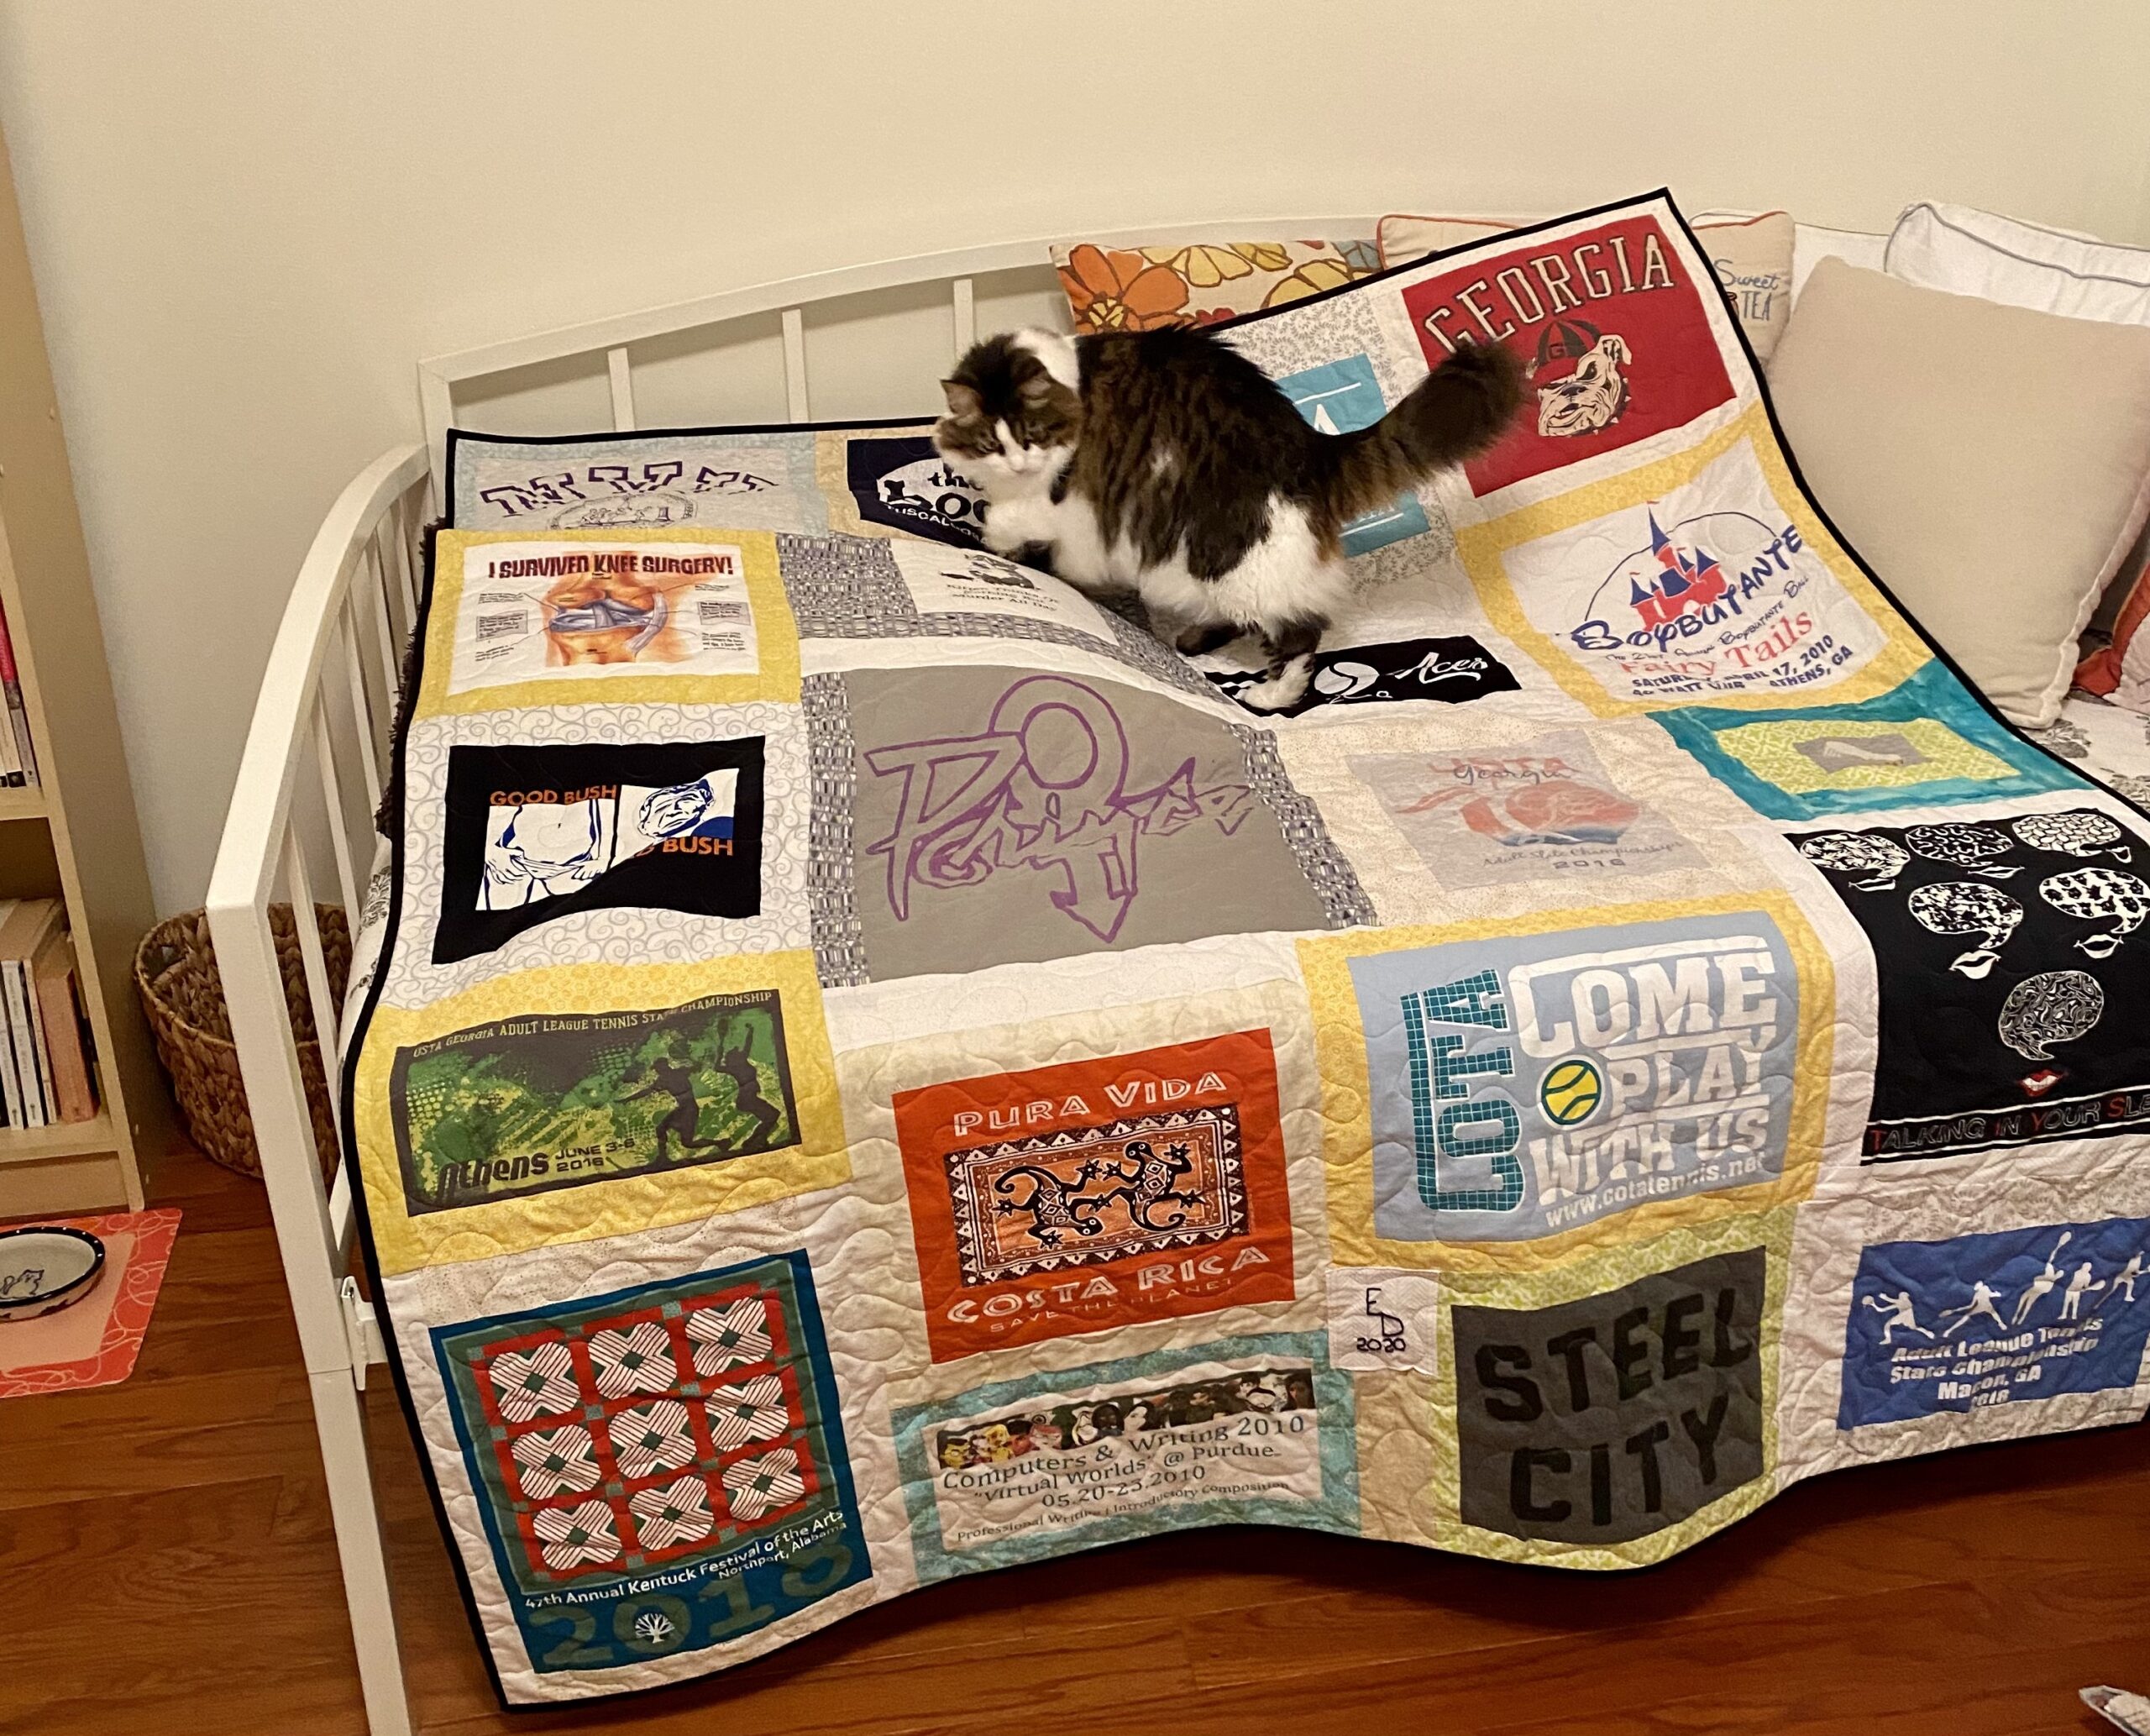 Finished quilt laid out on bed with brown and white cat walking on and sniffing it.